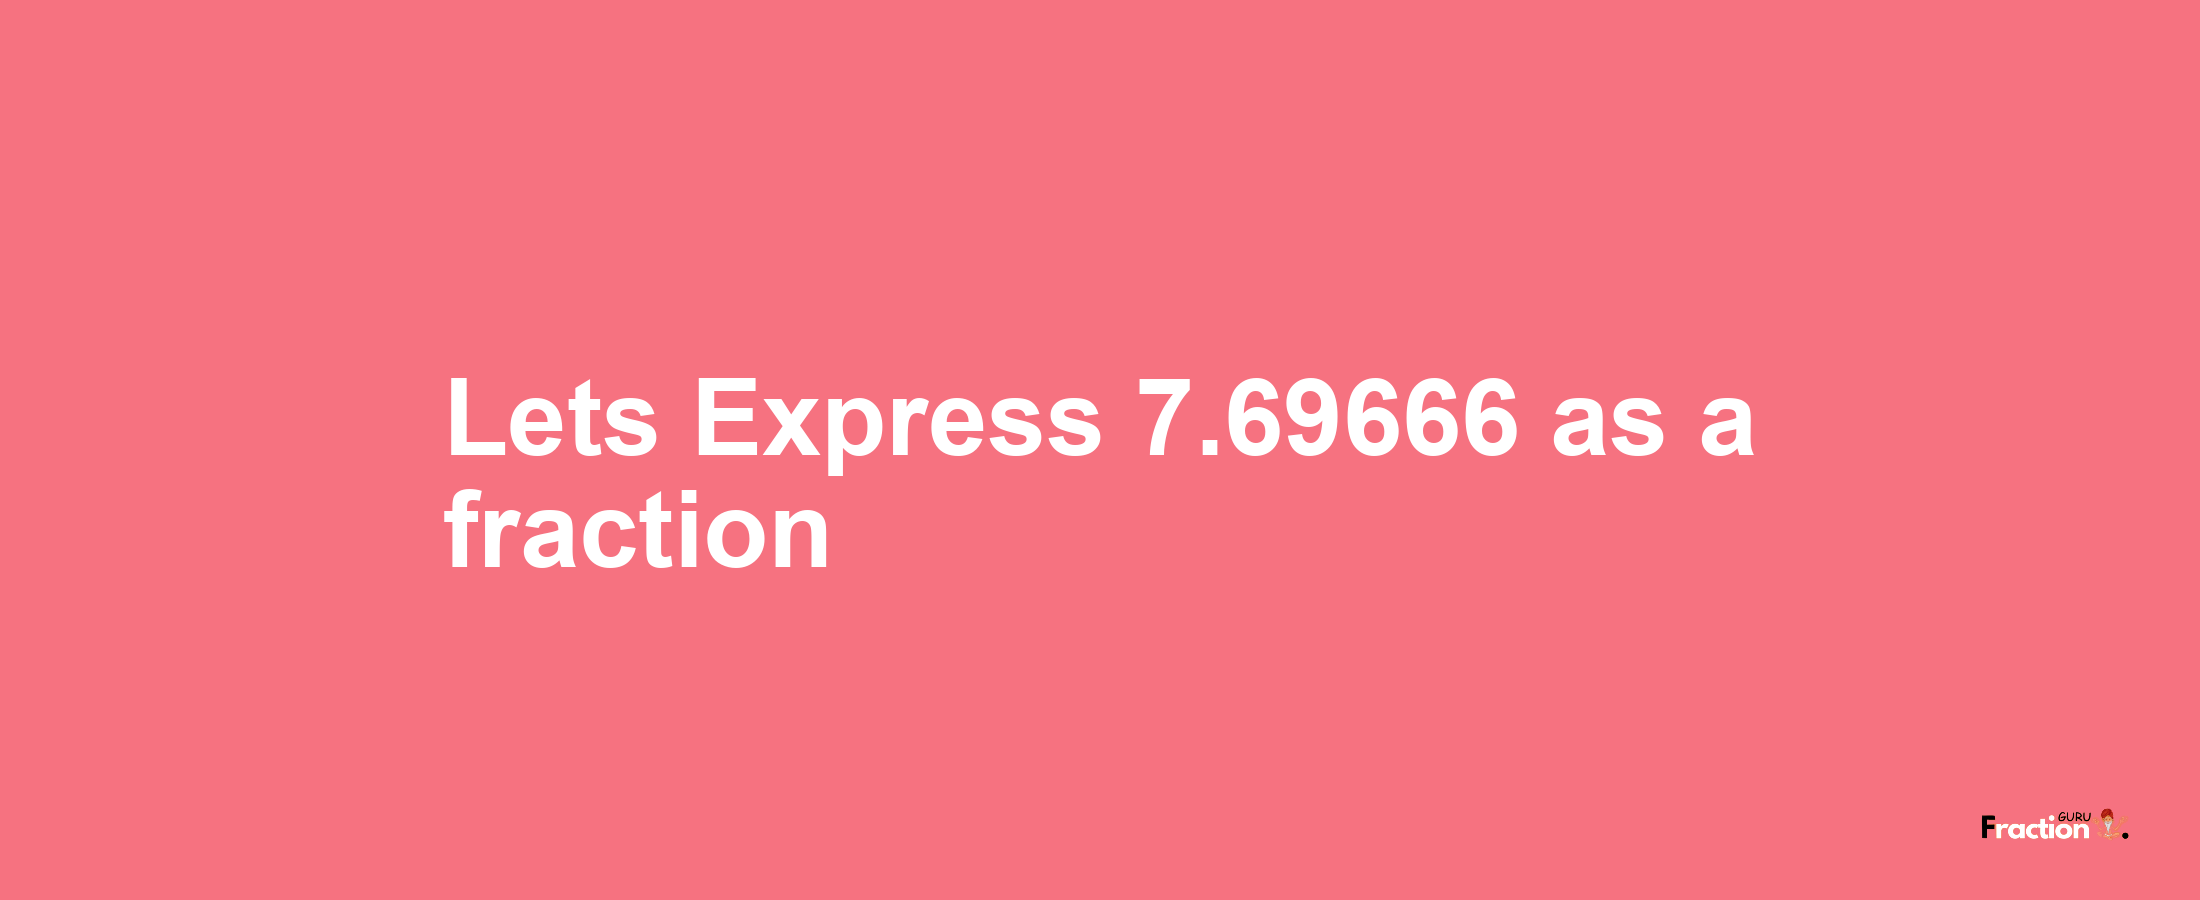 Lets Express 7.69666 as afraction